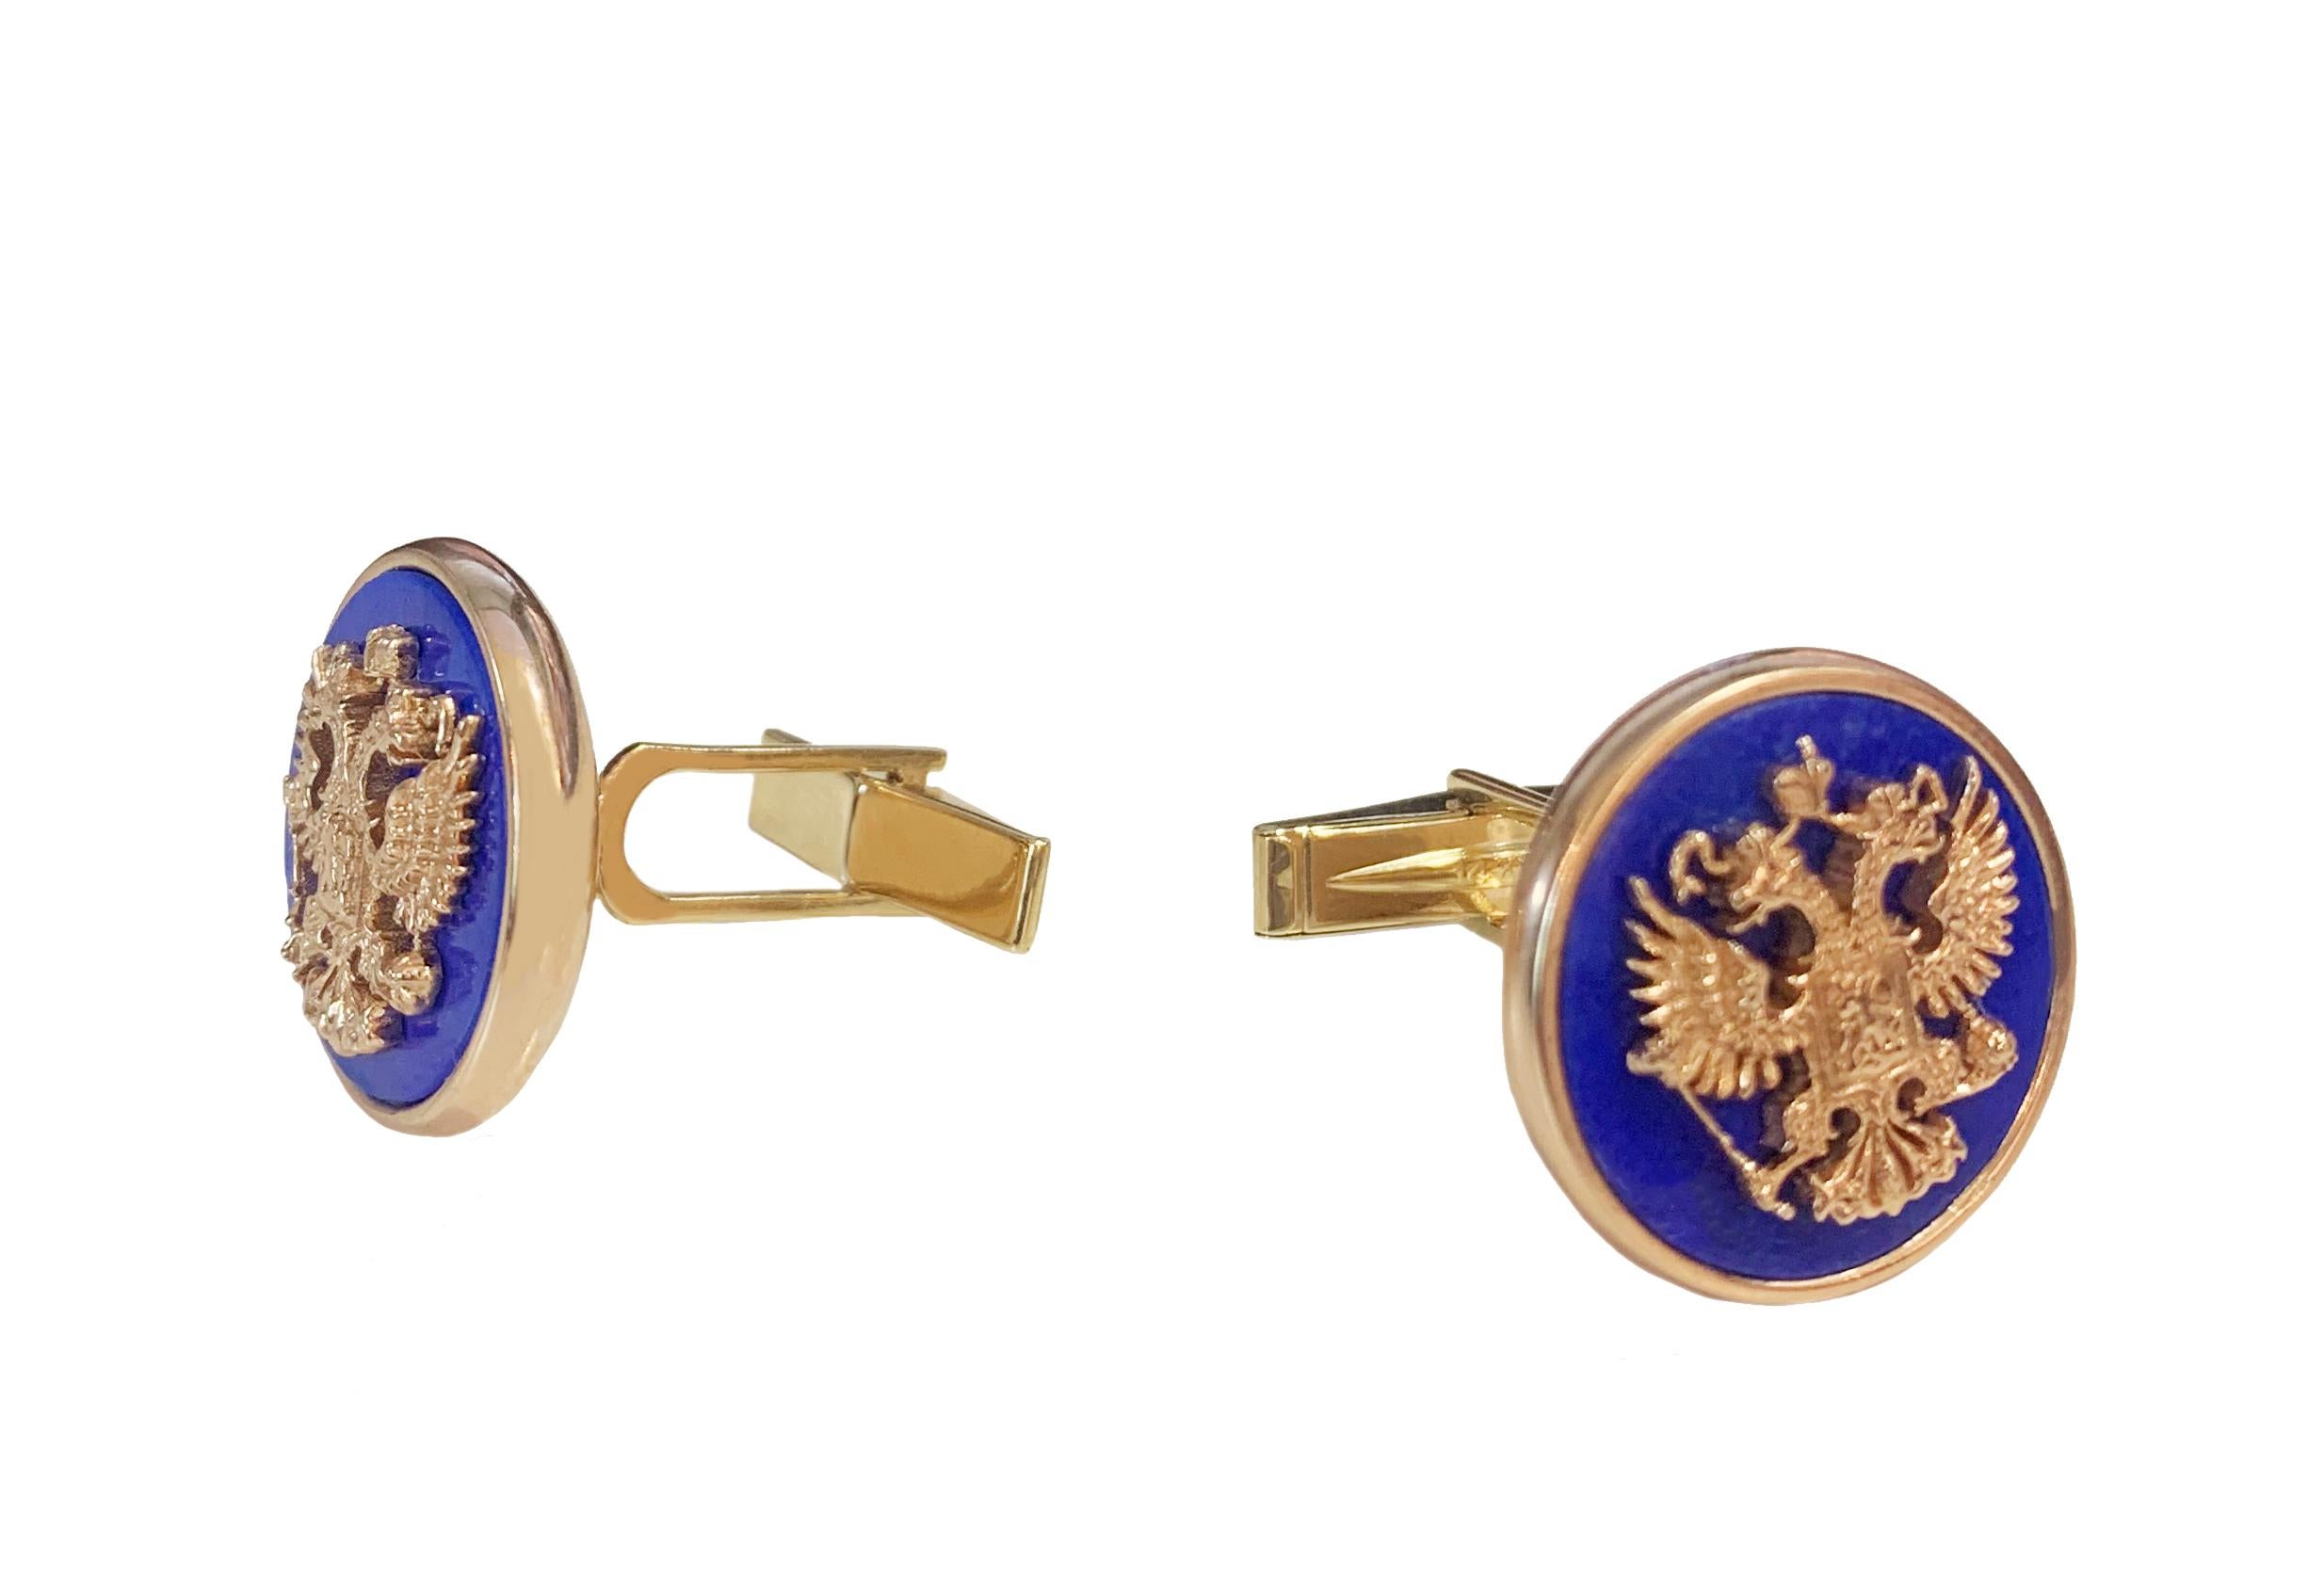 Double Eagle Cufflinks in 14k Red Gold with Lapis Lazuli In New Condition For Sale In New York, NY